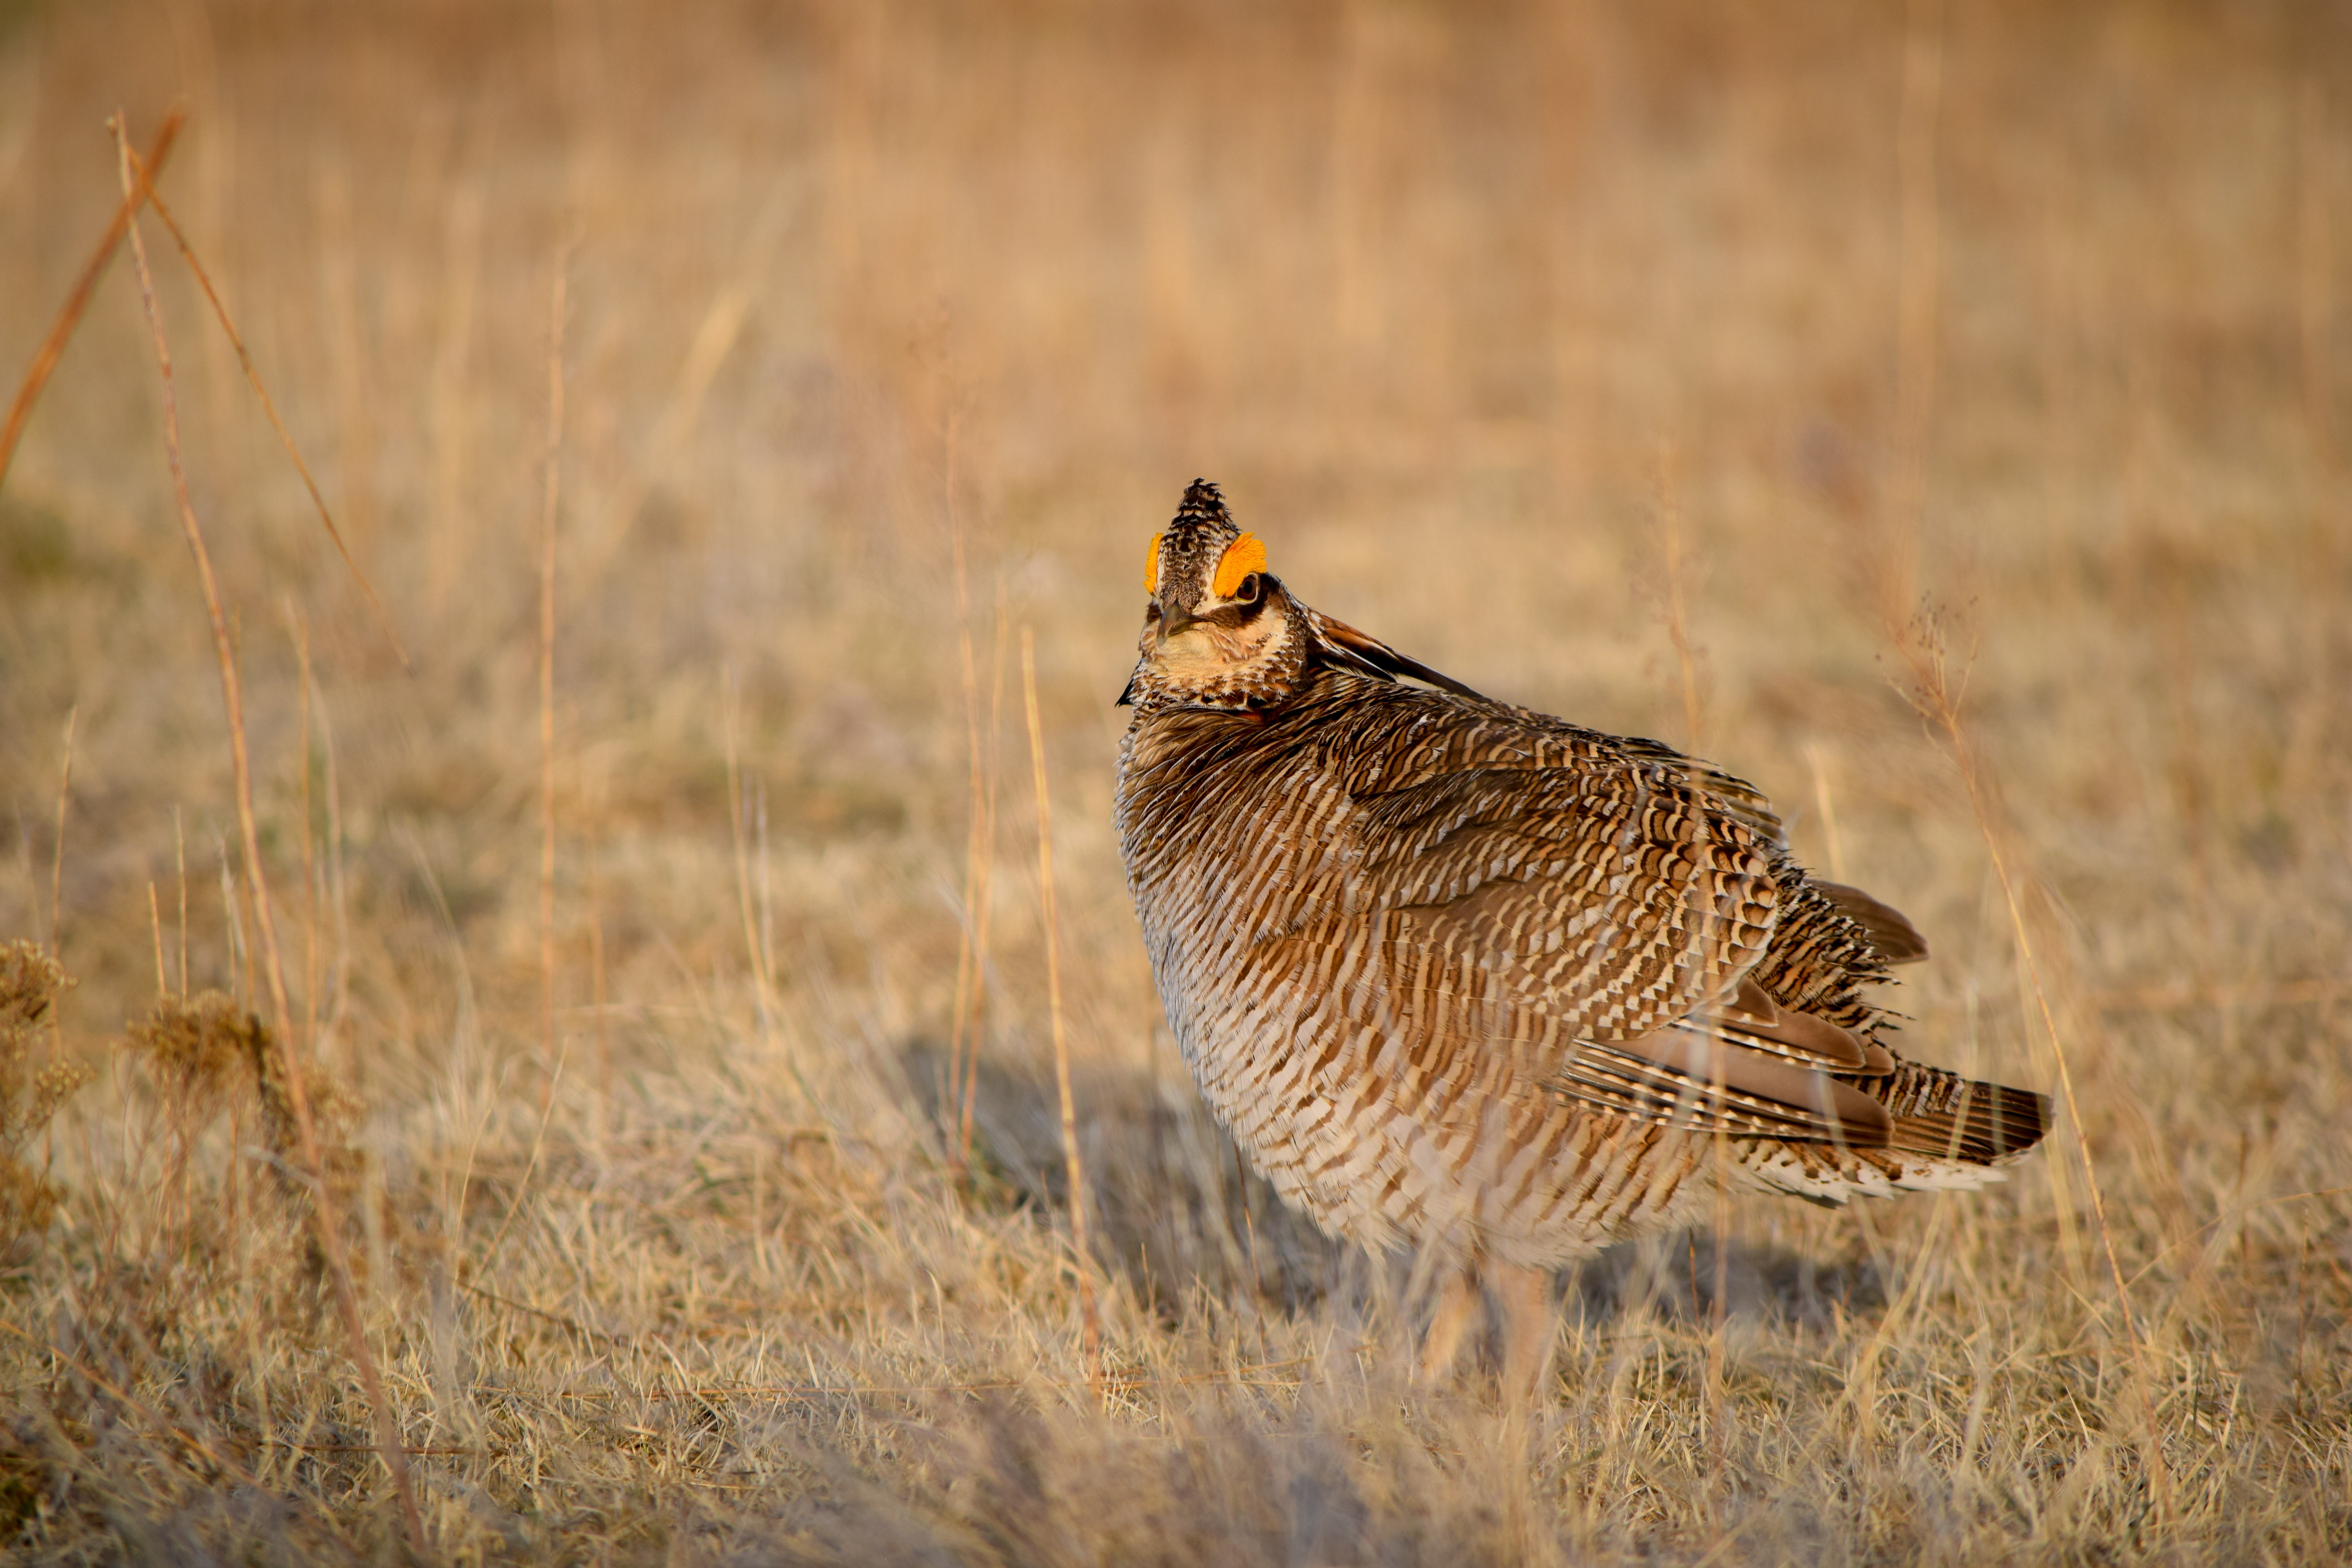 A lesser prairie chicken standing on grass looking at the camera.